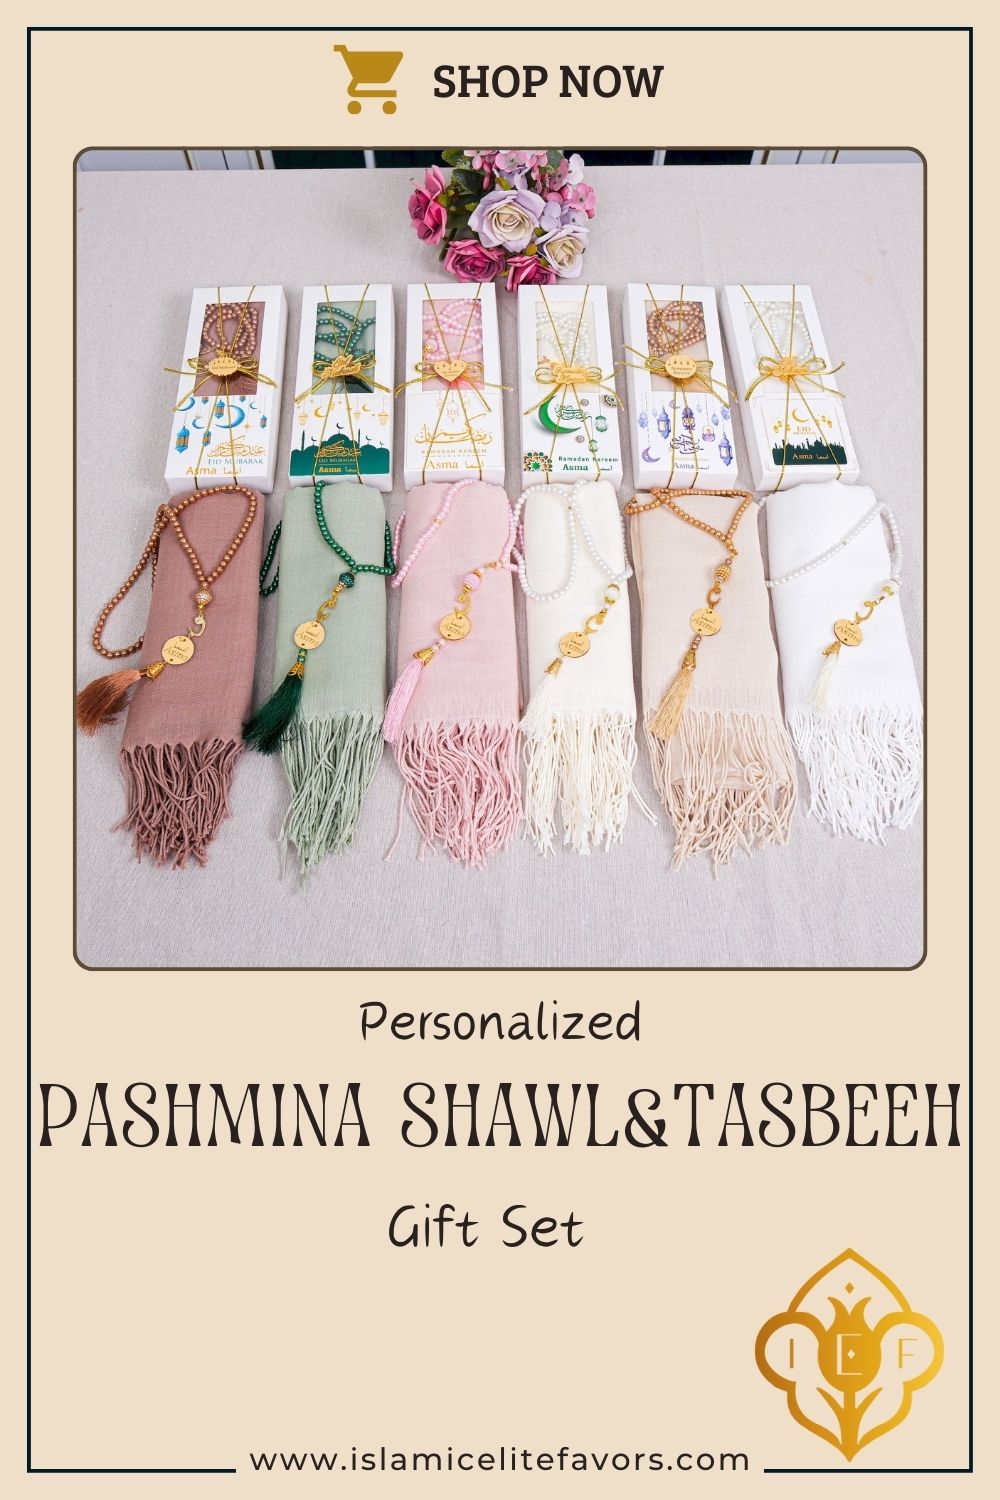 Personalized Pashmina Shawl Scarf Tasbeeh Gift Set Ramadan Eid Wedding - Islamic Elite Favors is a handmade gift shop offering a wide variety of unique and personalized gifts for all occasions. Whether you're looking for the perfect Ramadan, Eid, Hajj, wedding gift or something special for a birthday, baby shower or anniversary, we have something for everyone. High quality, made with love.